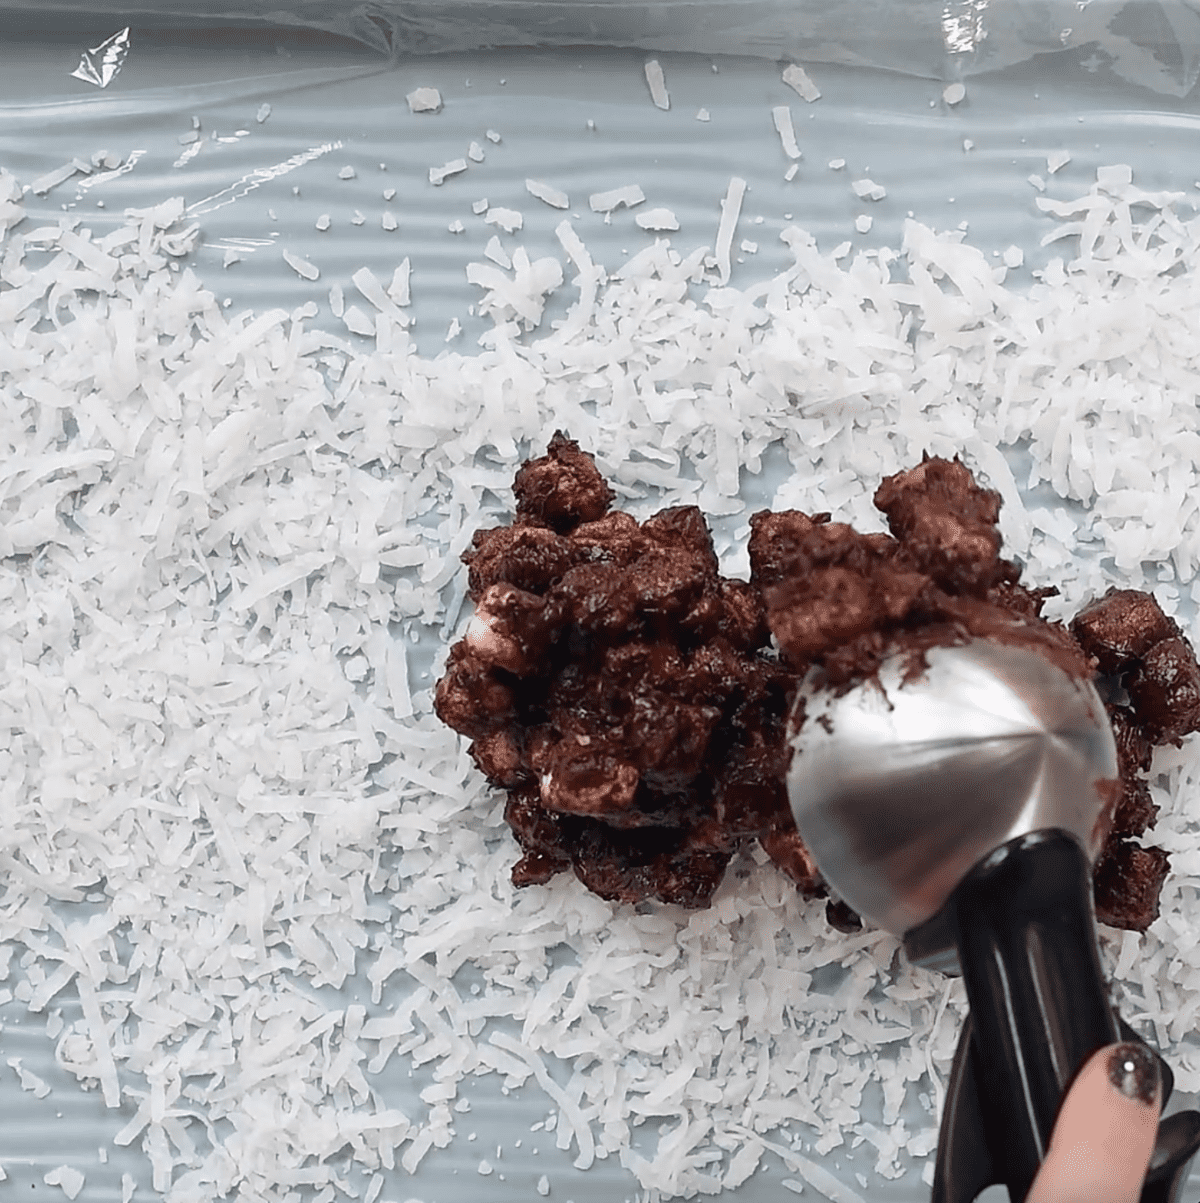 shredded coconut and chocolate marshmallows mixture spread over plastic wrap